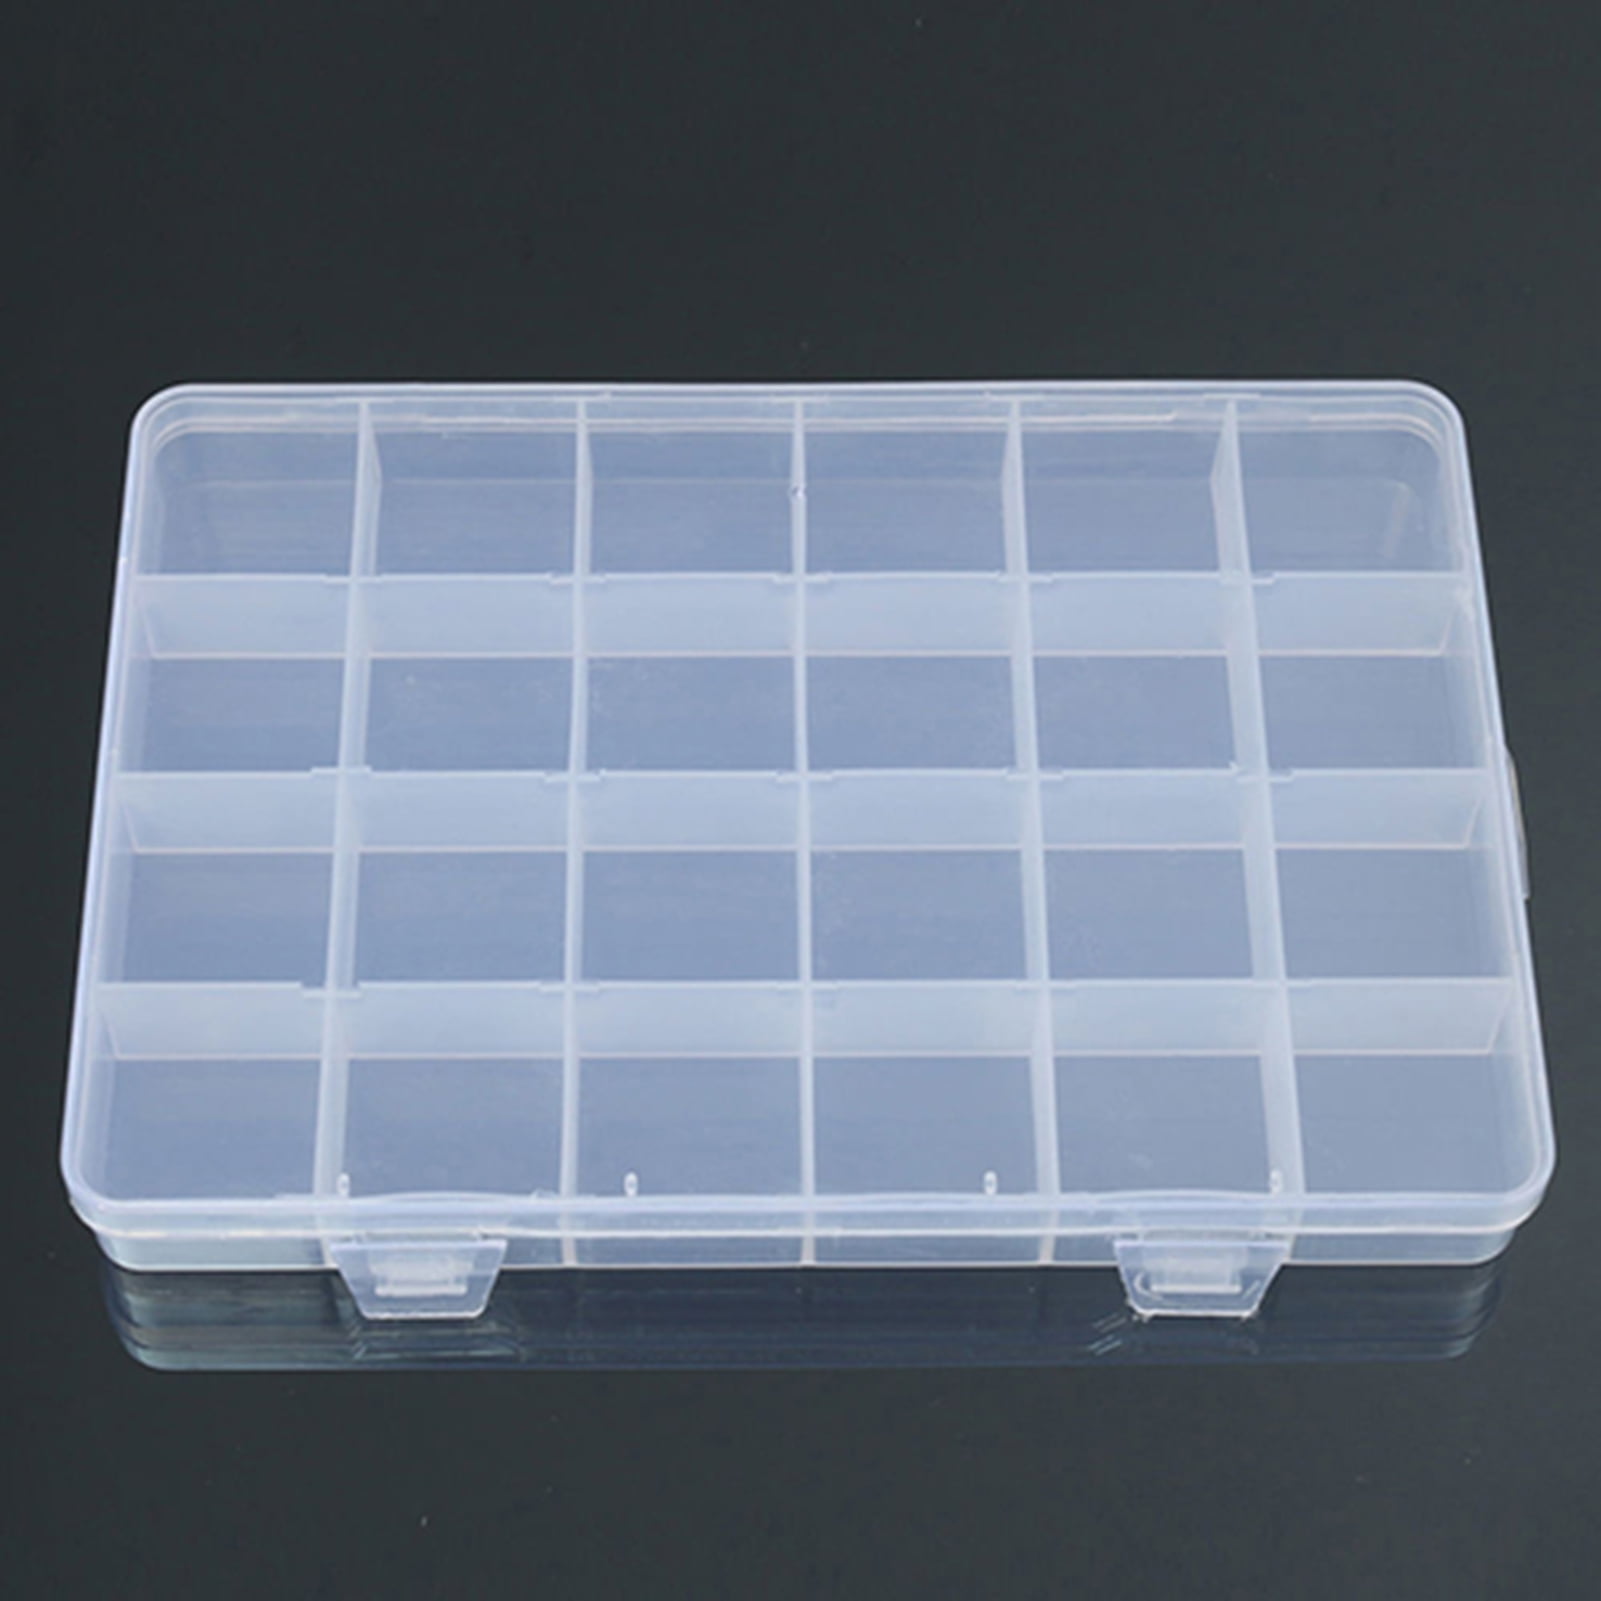 Details about   Clear Jewelry Box 28 Slots Plastic Bead Storage Container Earrings Organizer 